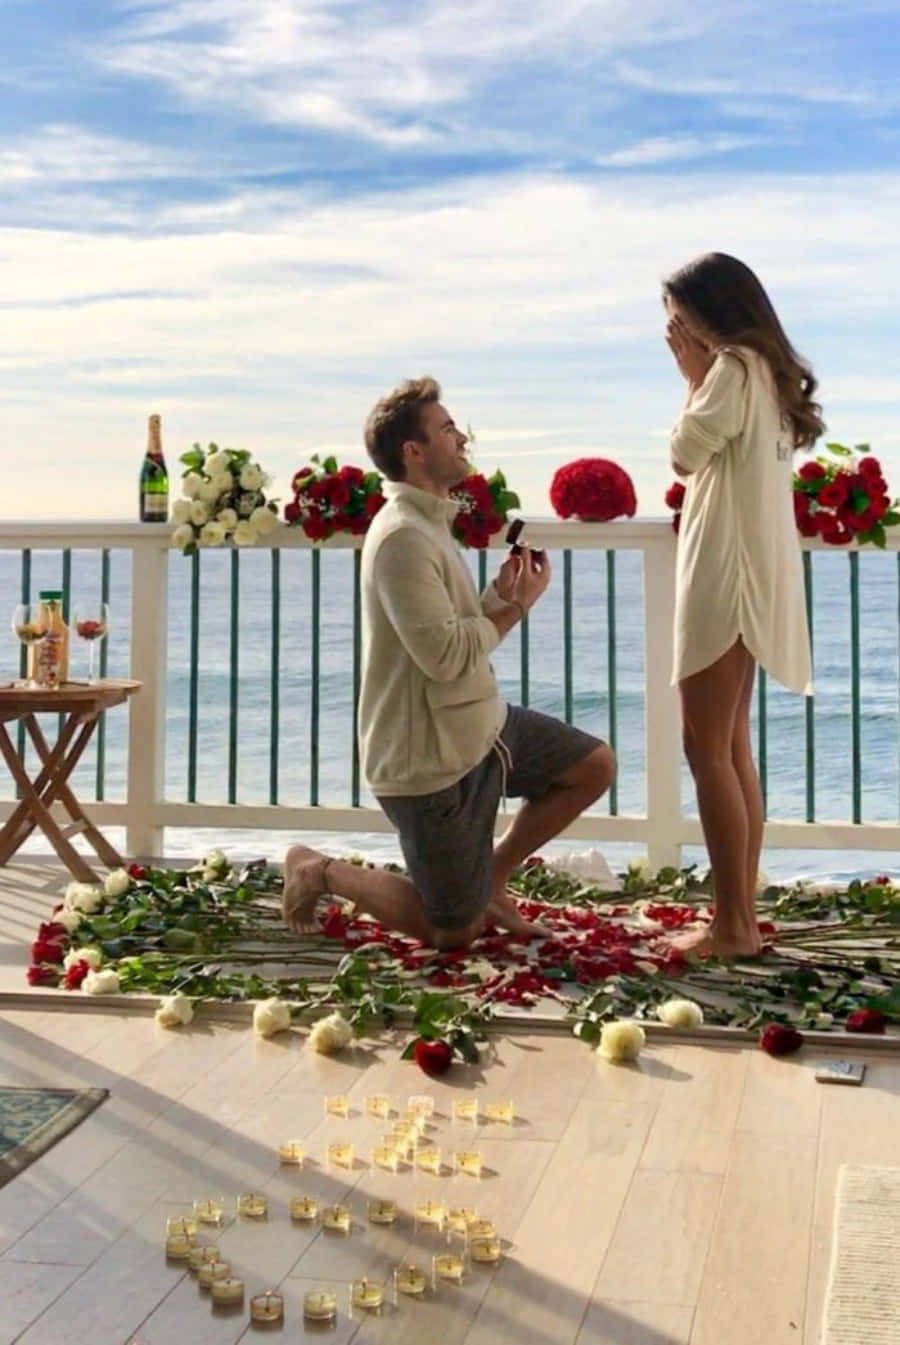 Start Your Life Together with a Special Proposal.